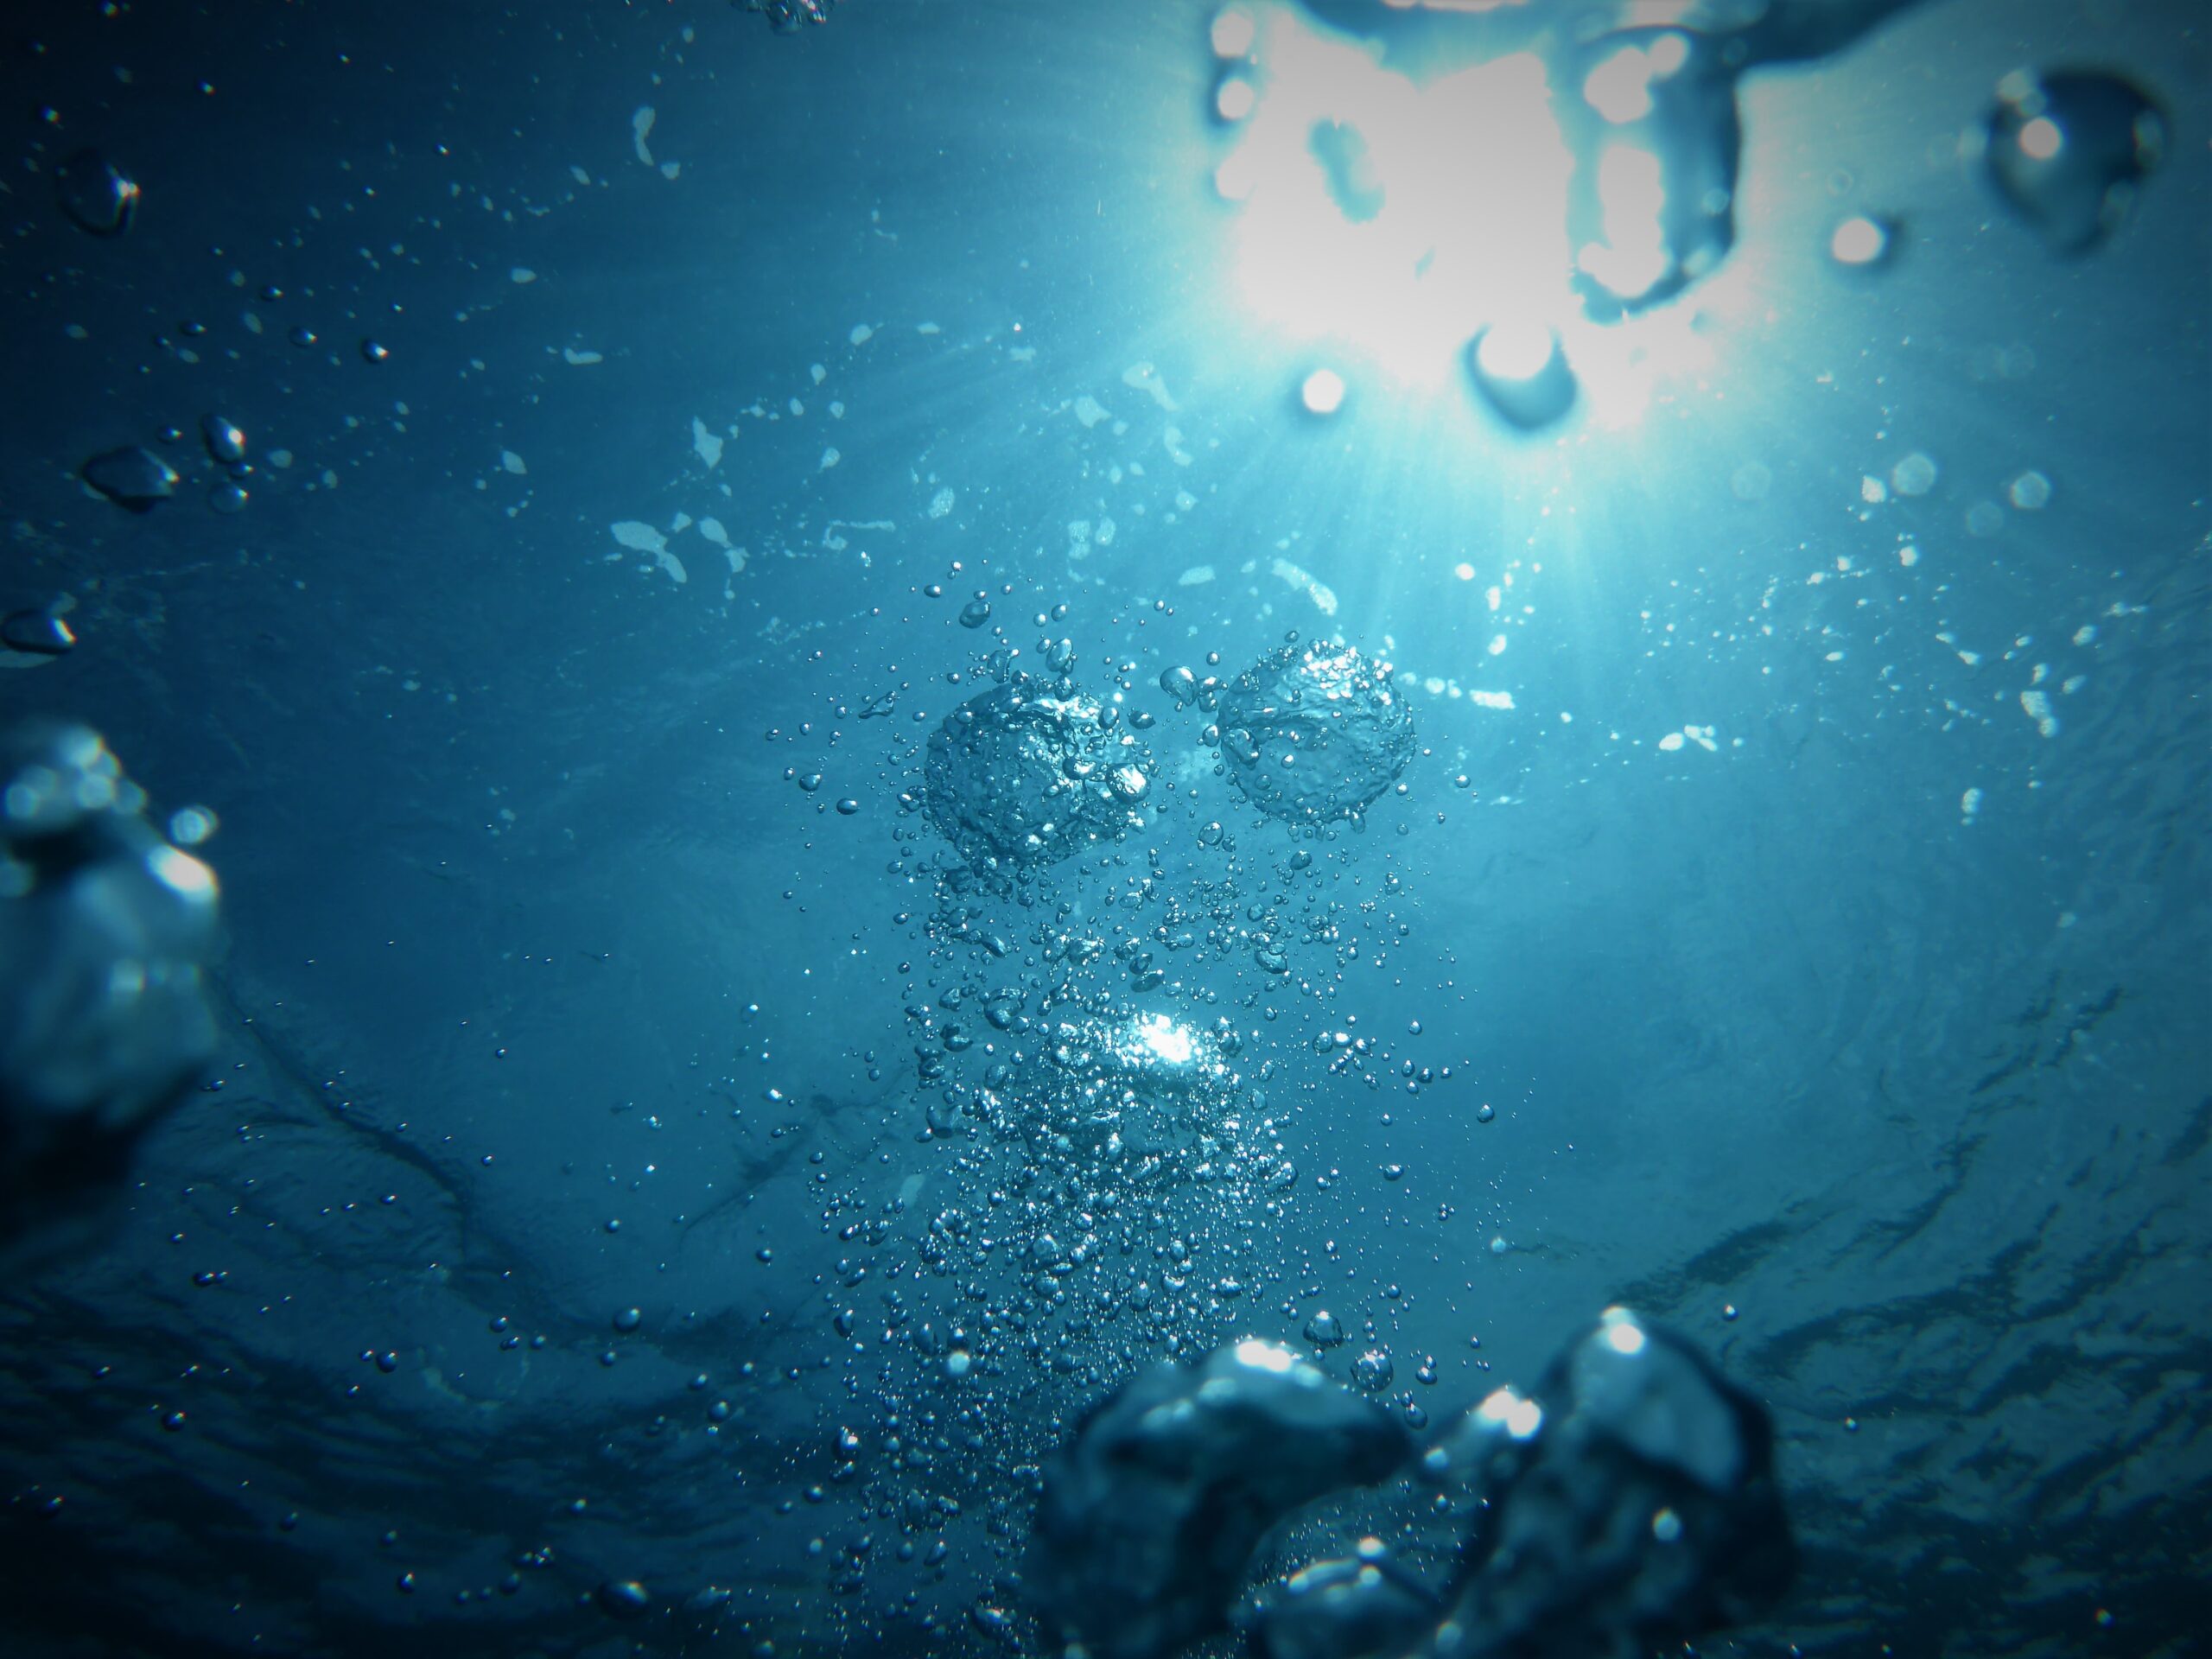 Slipping through our fingers: The future of water